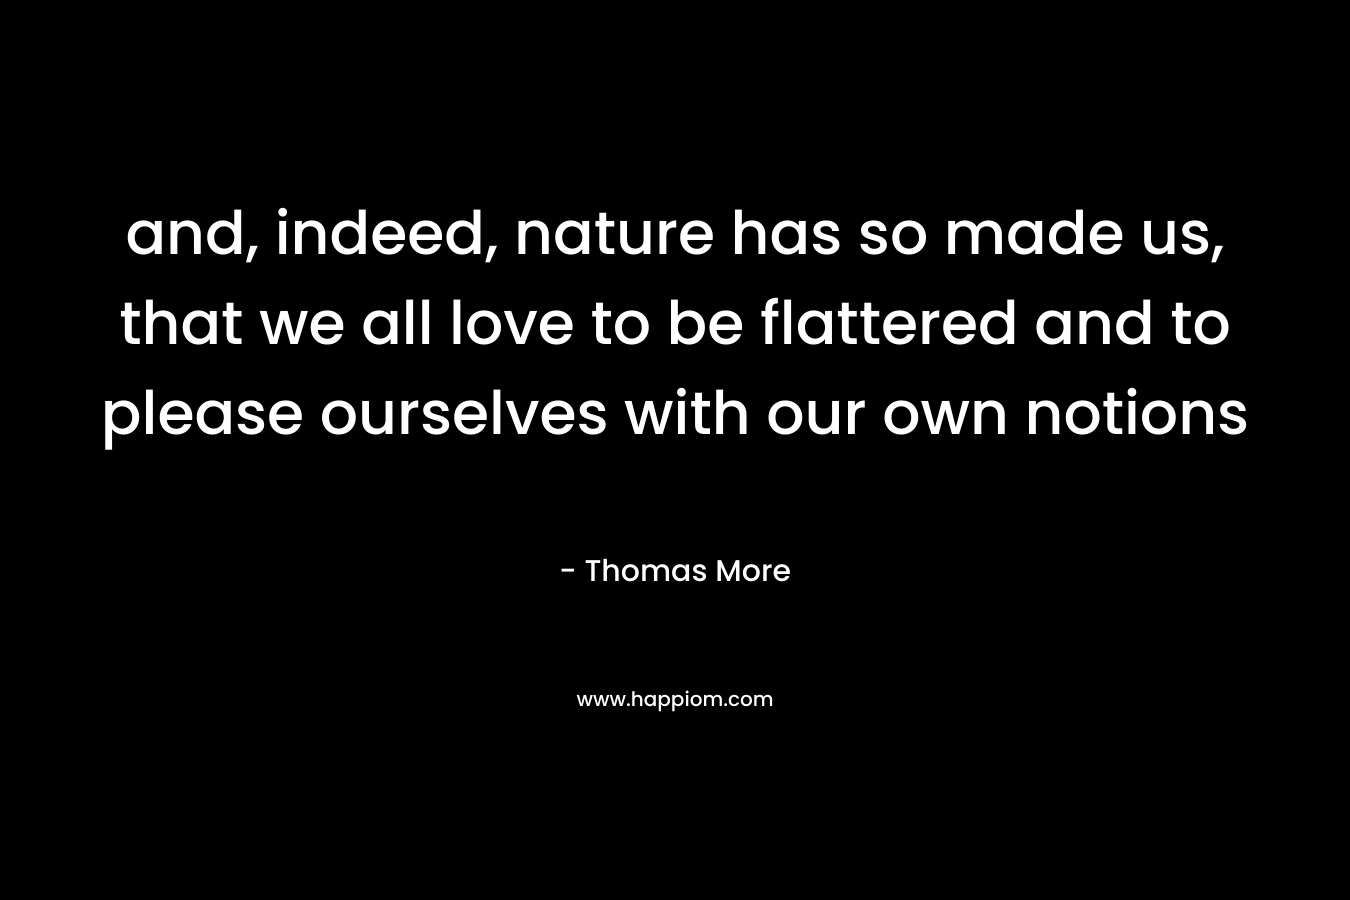 and, indeed, nature has so made us, that we all love to be flattered and to please ourselves with our own notions – Thomas More